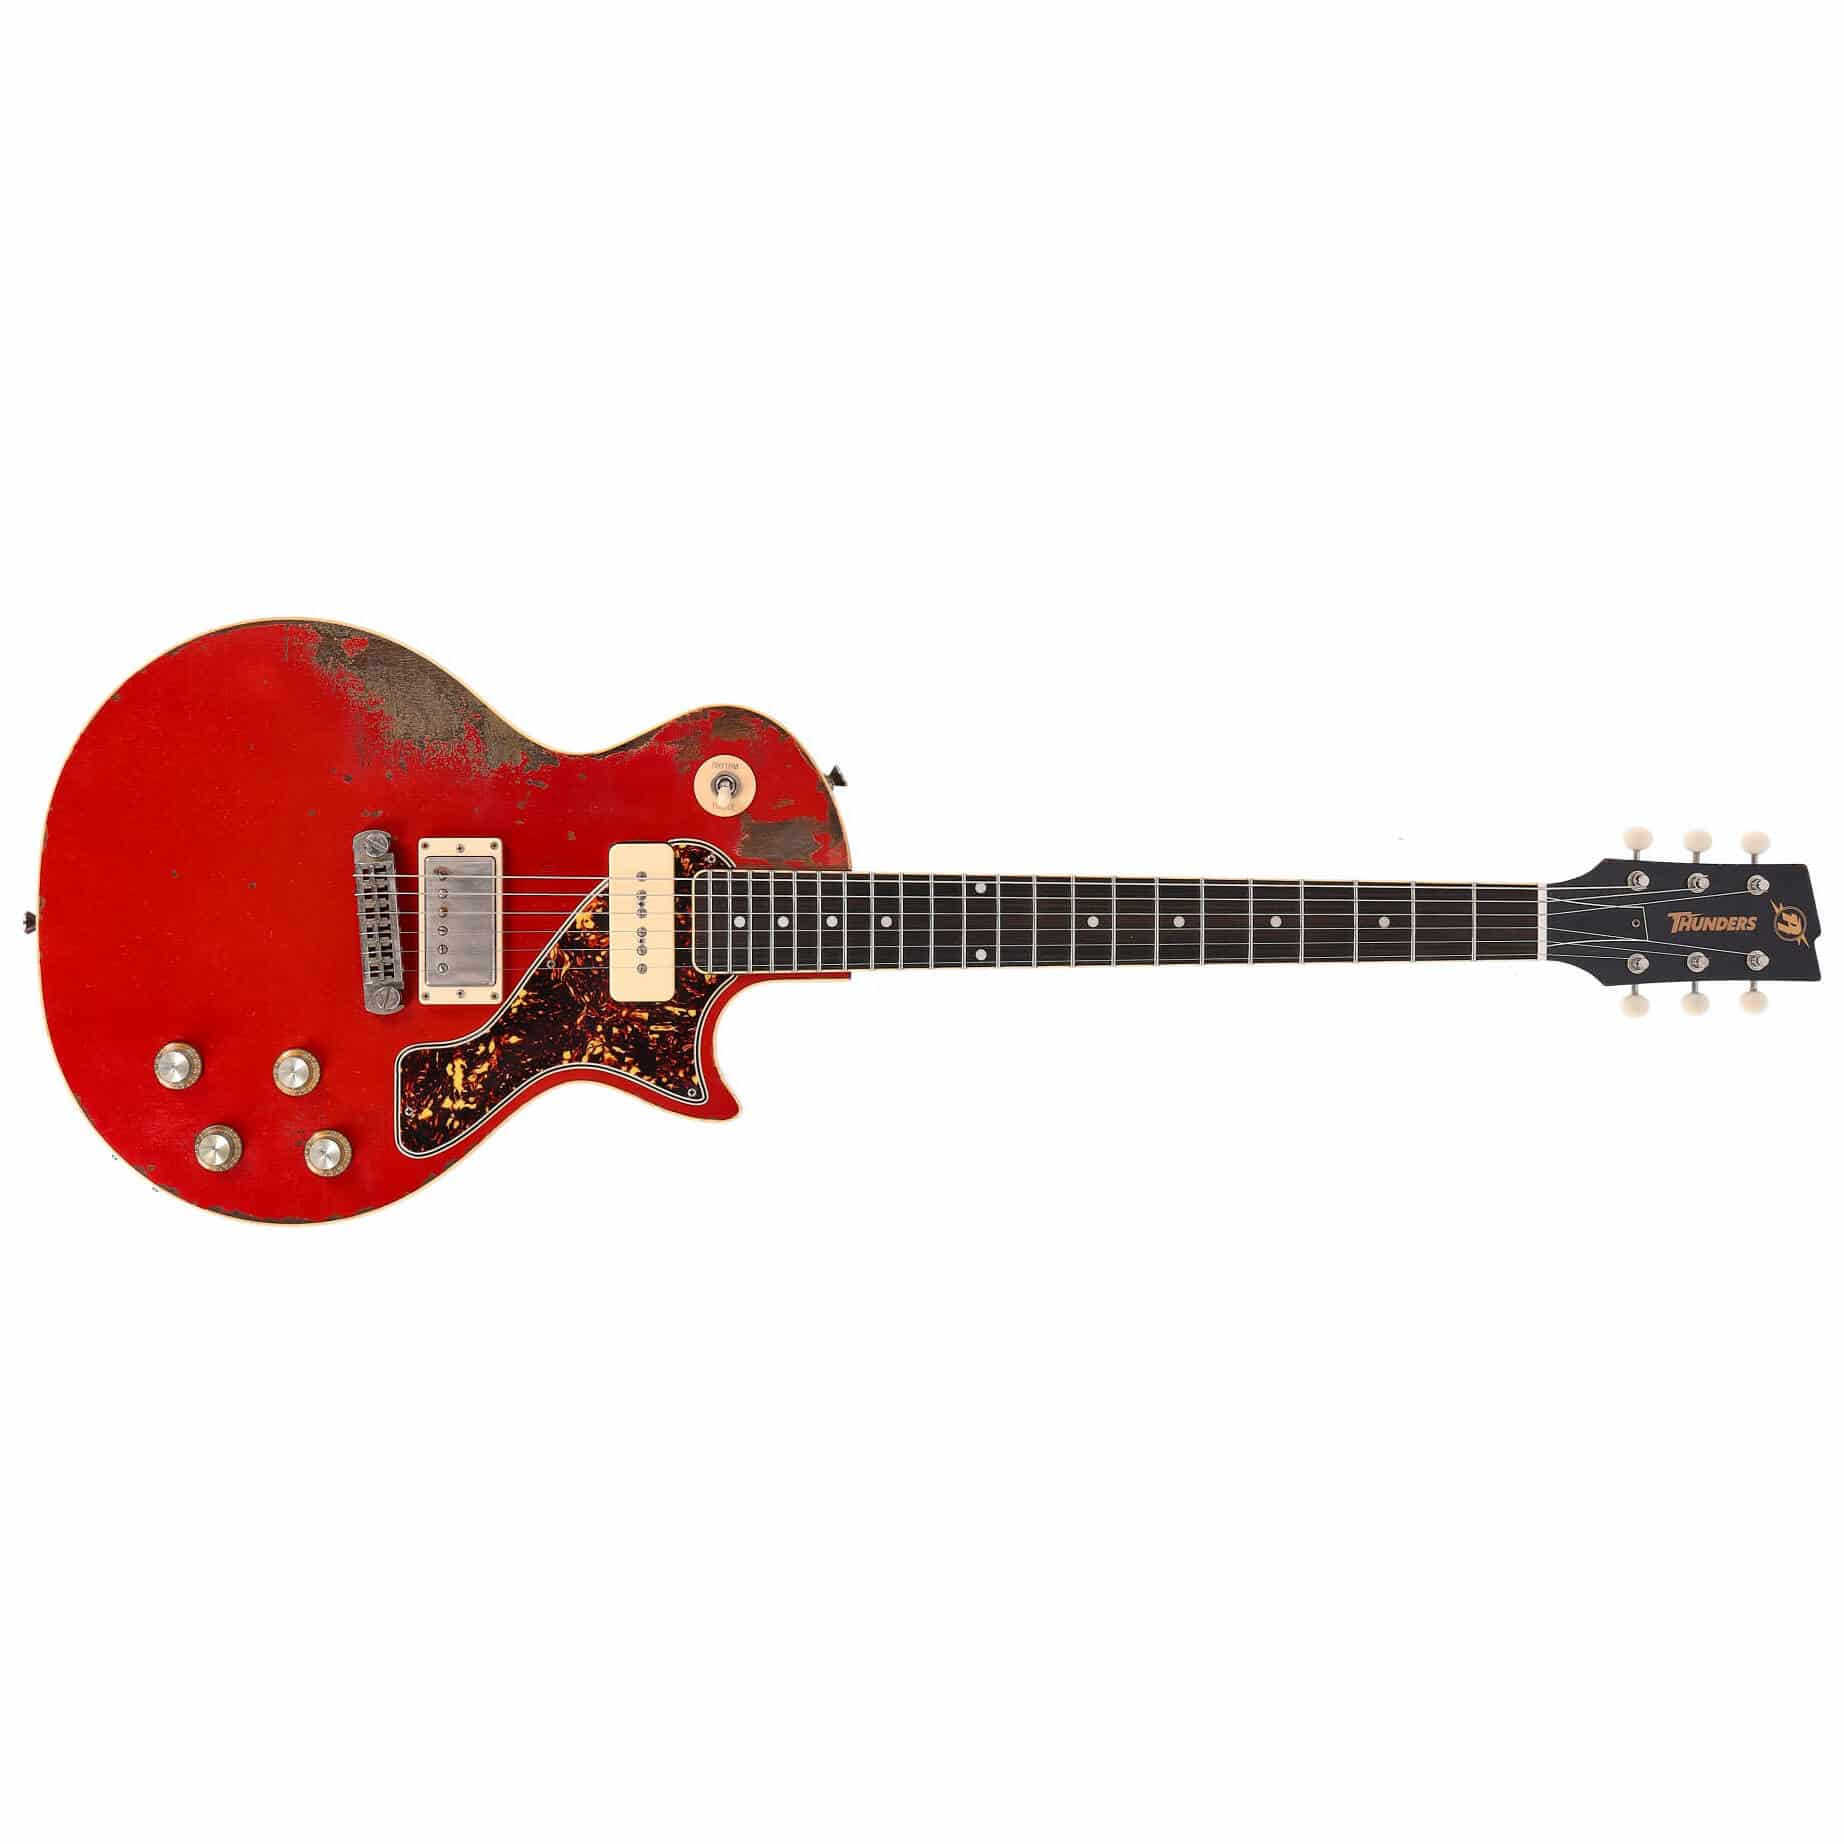 Rock N Roll Relics Thunders II SC Candy Apple Red Heavy Aged 1